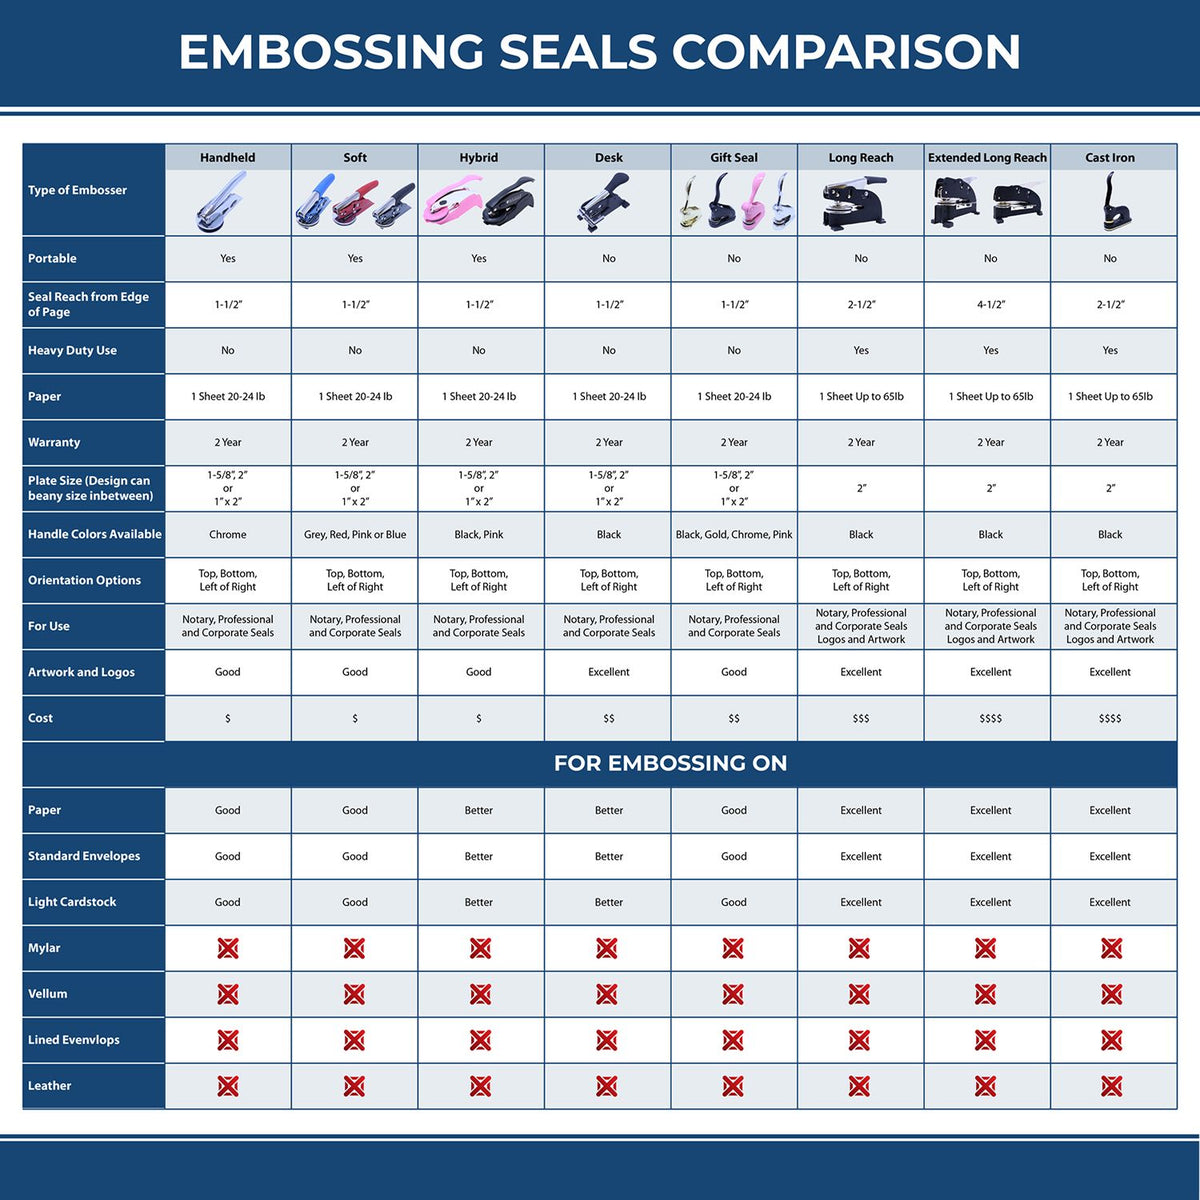 A comparison chart for the different types of mount models available for the State of Georgia Extended Long Reach Engineer Seal.